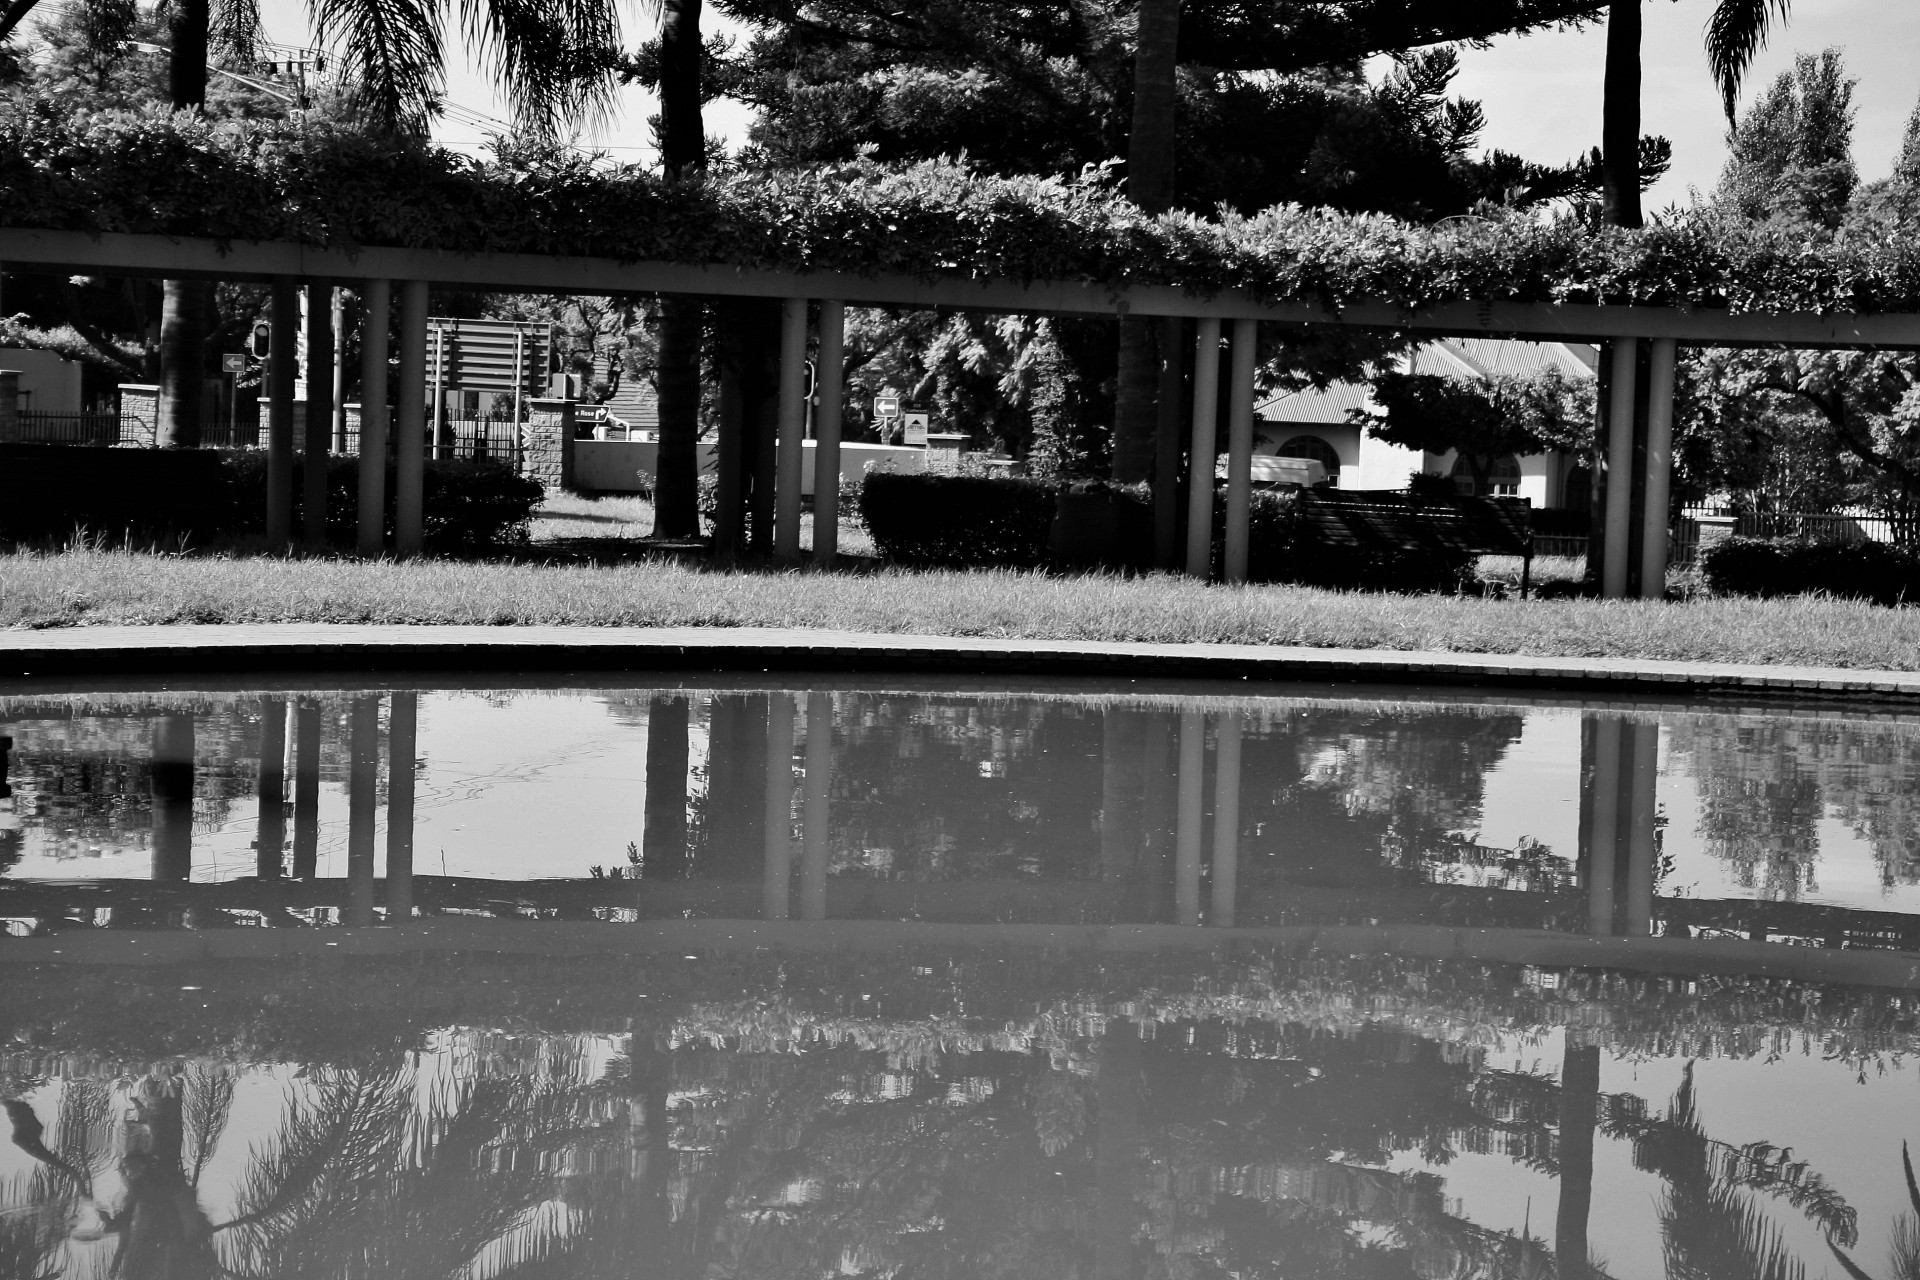 pond water reflection free photo